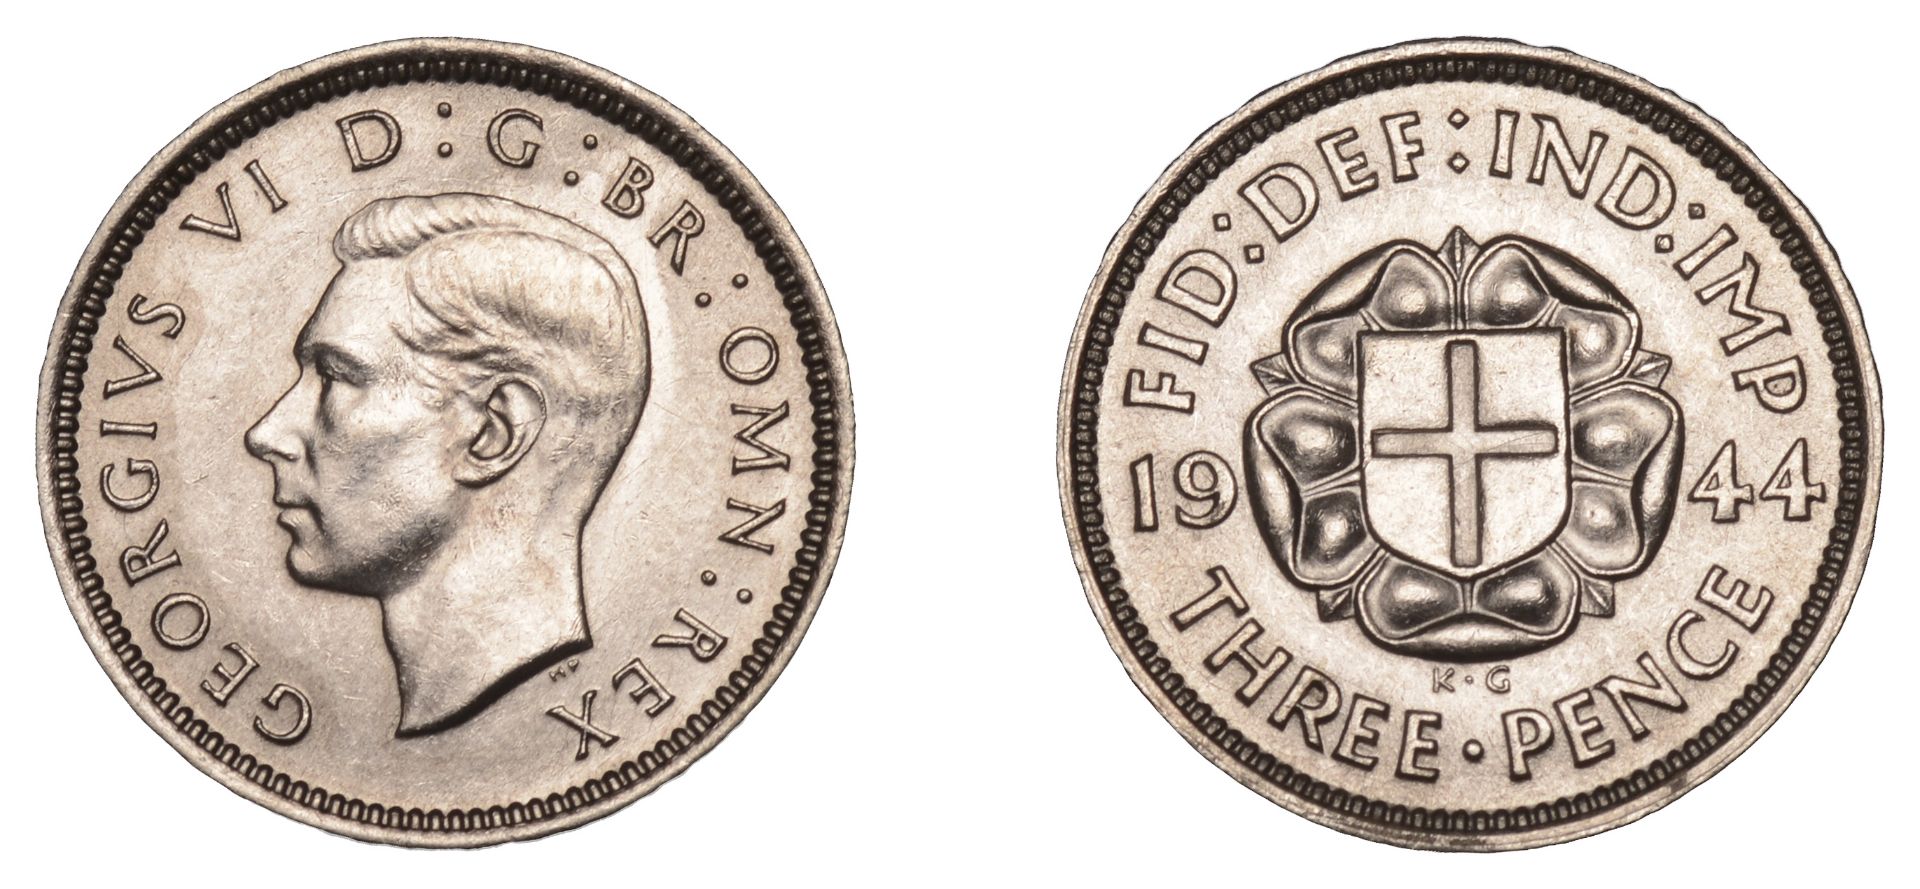 George VI (1936-1952), Silver Threepence, 1944 (ESC 4298; S 4085). About as struck Â£80-Â£100